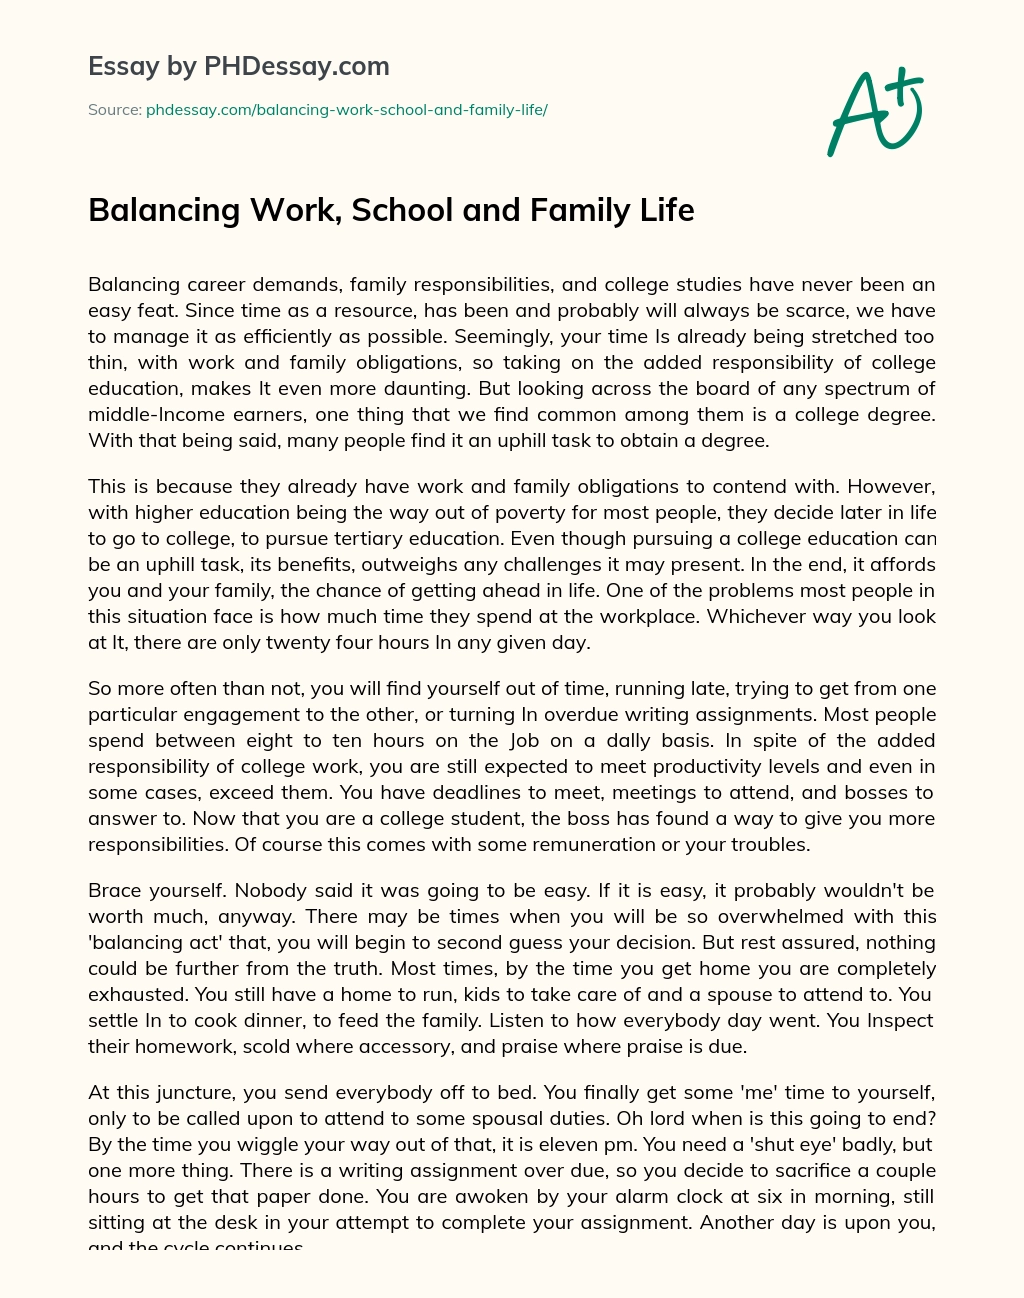 essay on balancing school work and family